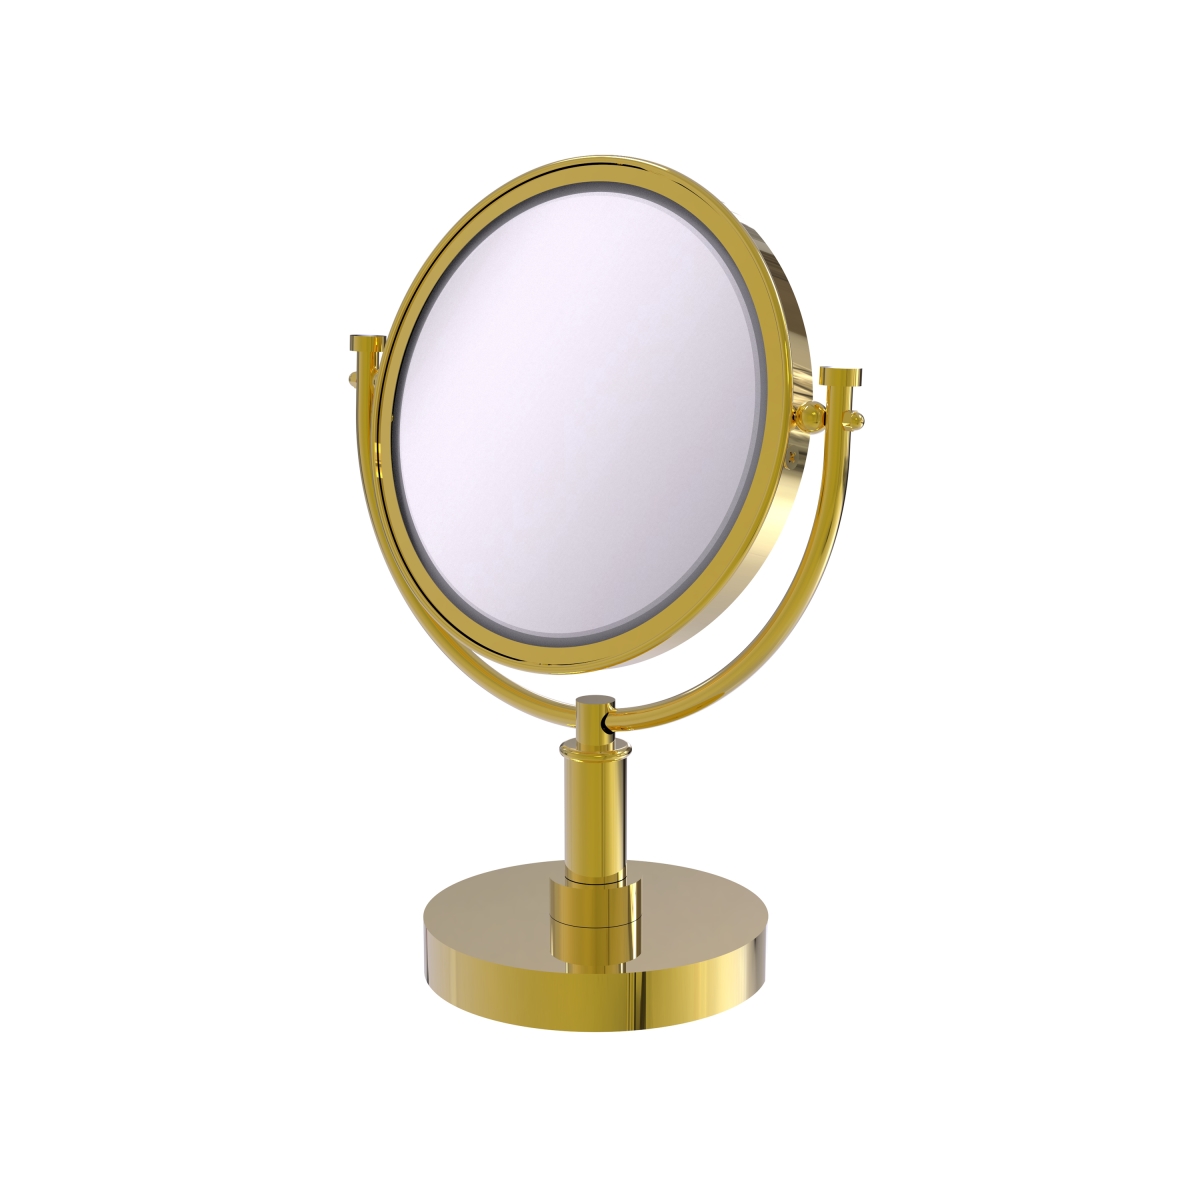 Dm-4-3x-unl Smooth Ring Style 8 In. Vanity Top Make-up Mirror 3x Magnification, Unlacquered Brass